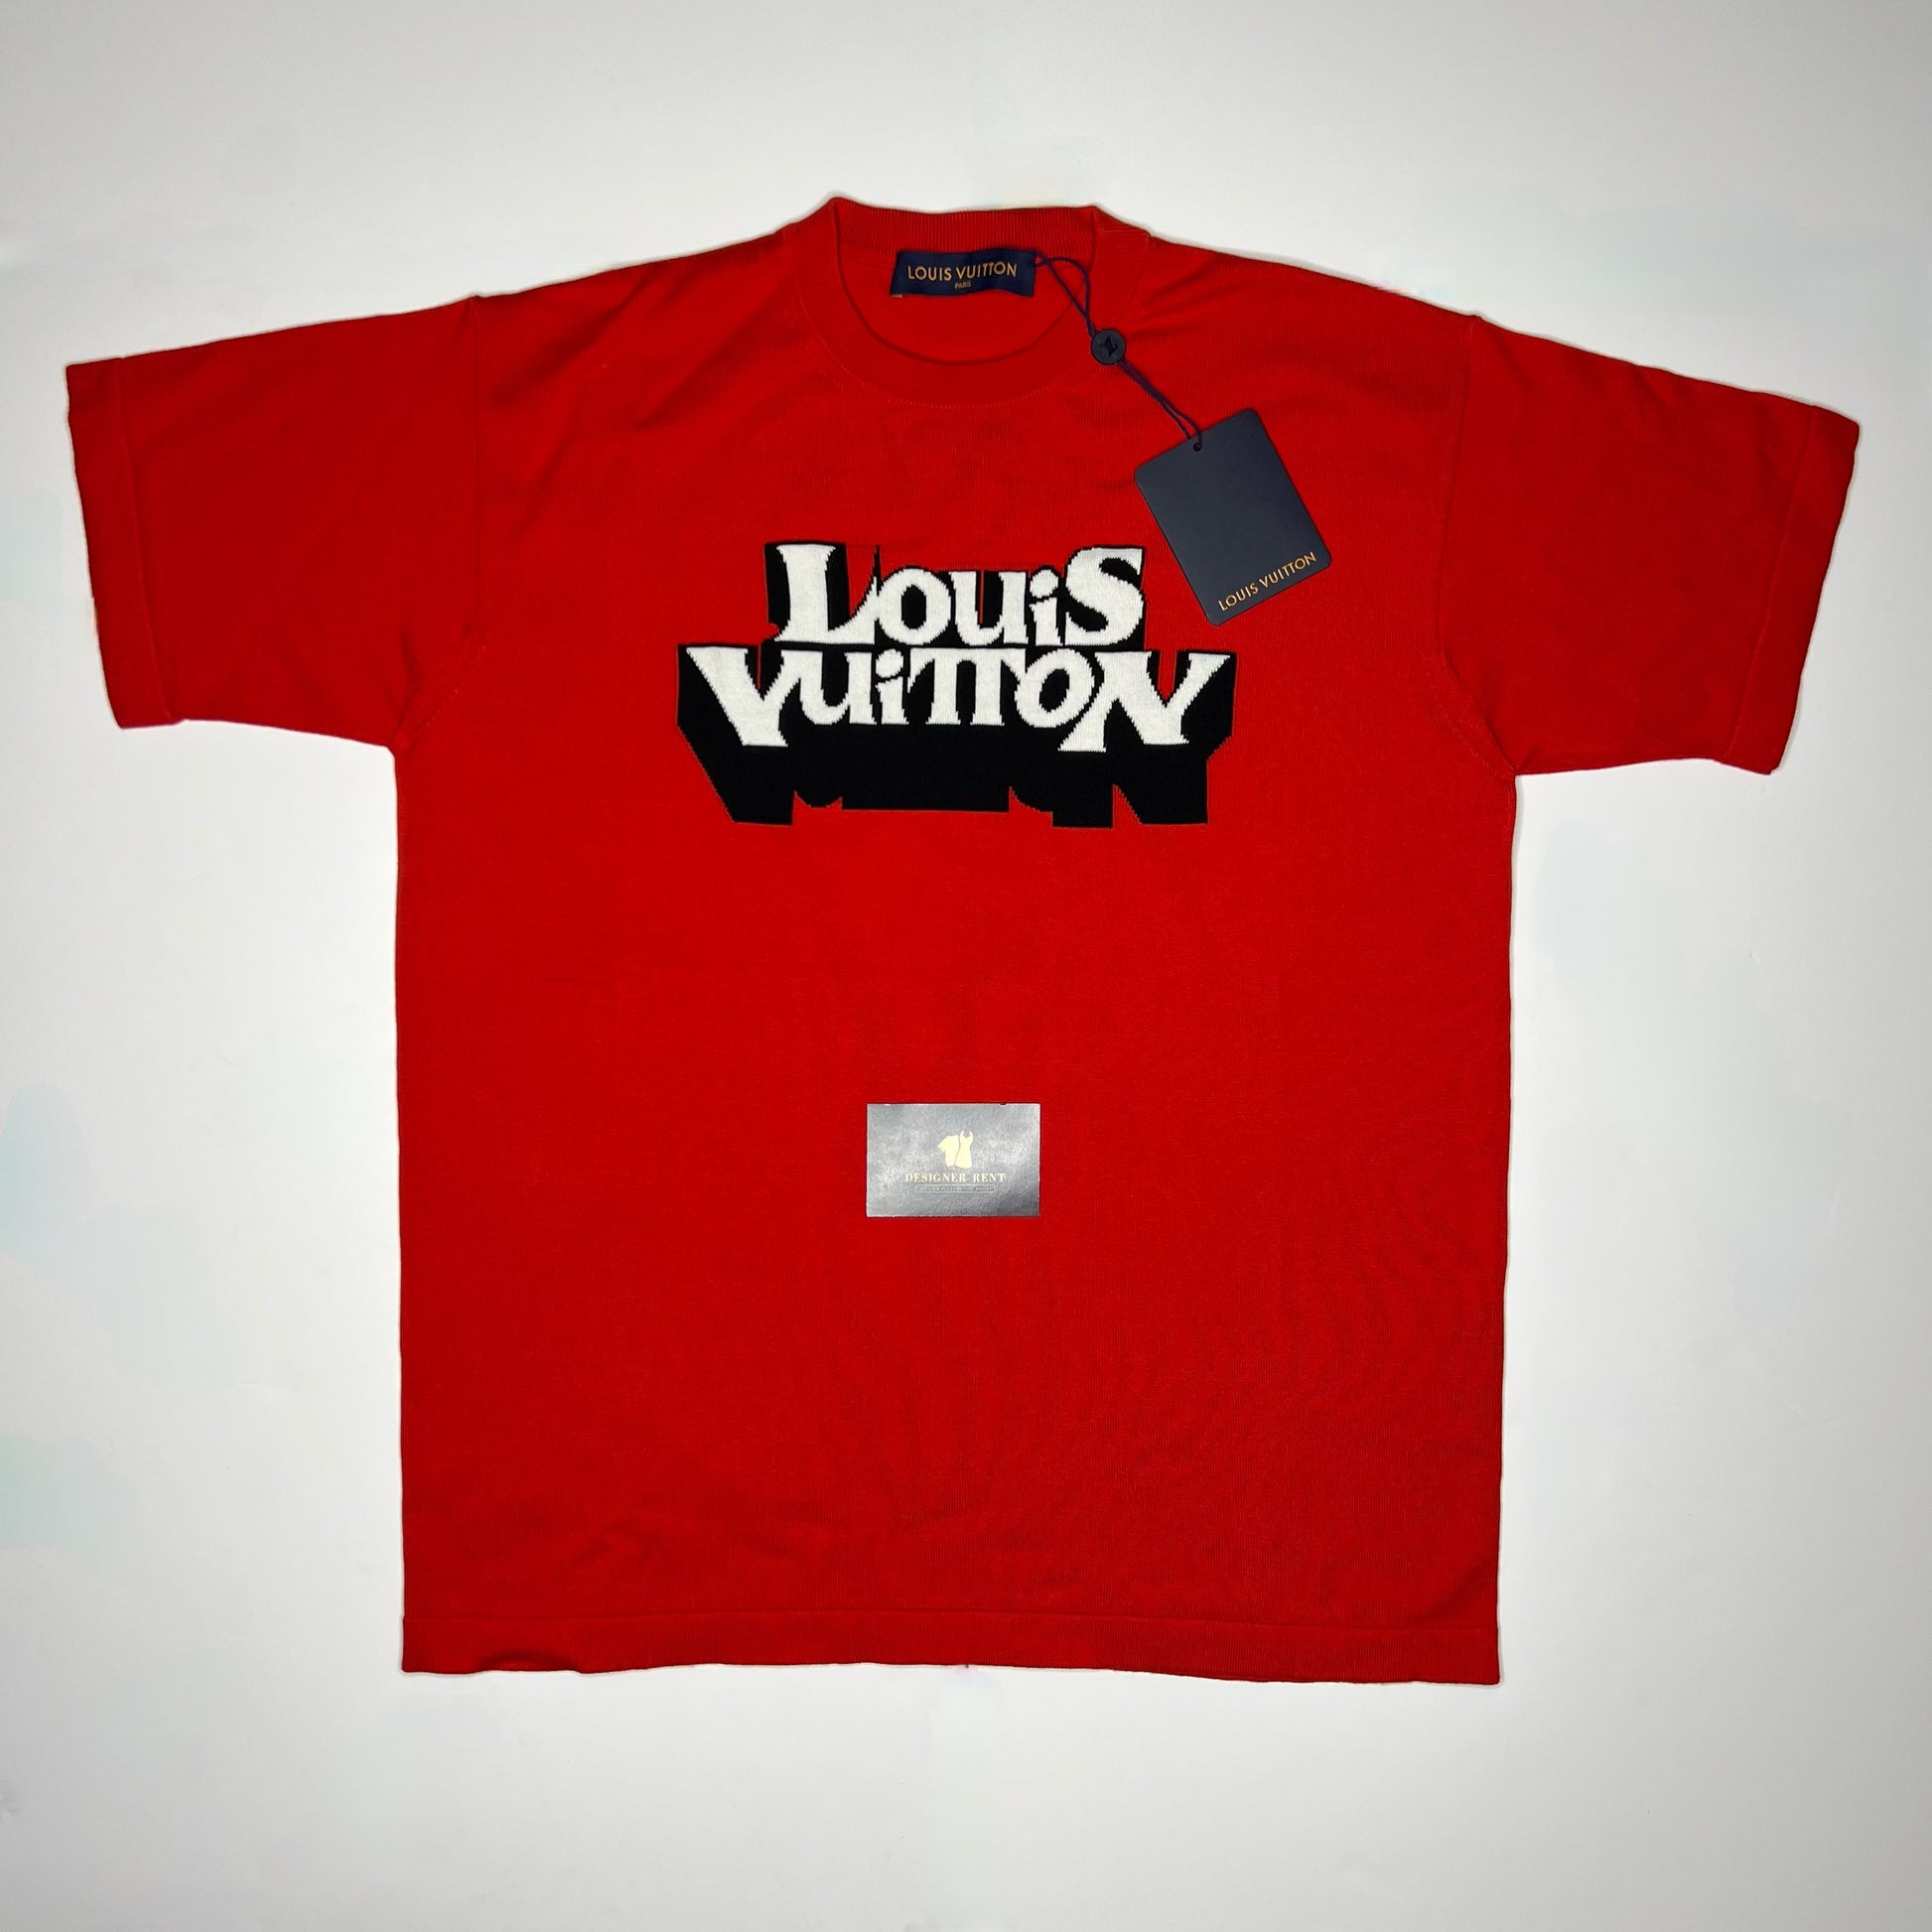 Louis Vuitton Graphic Short-Sleeved Red T-Shirt